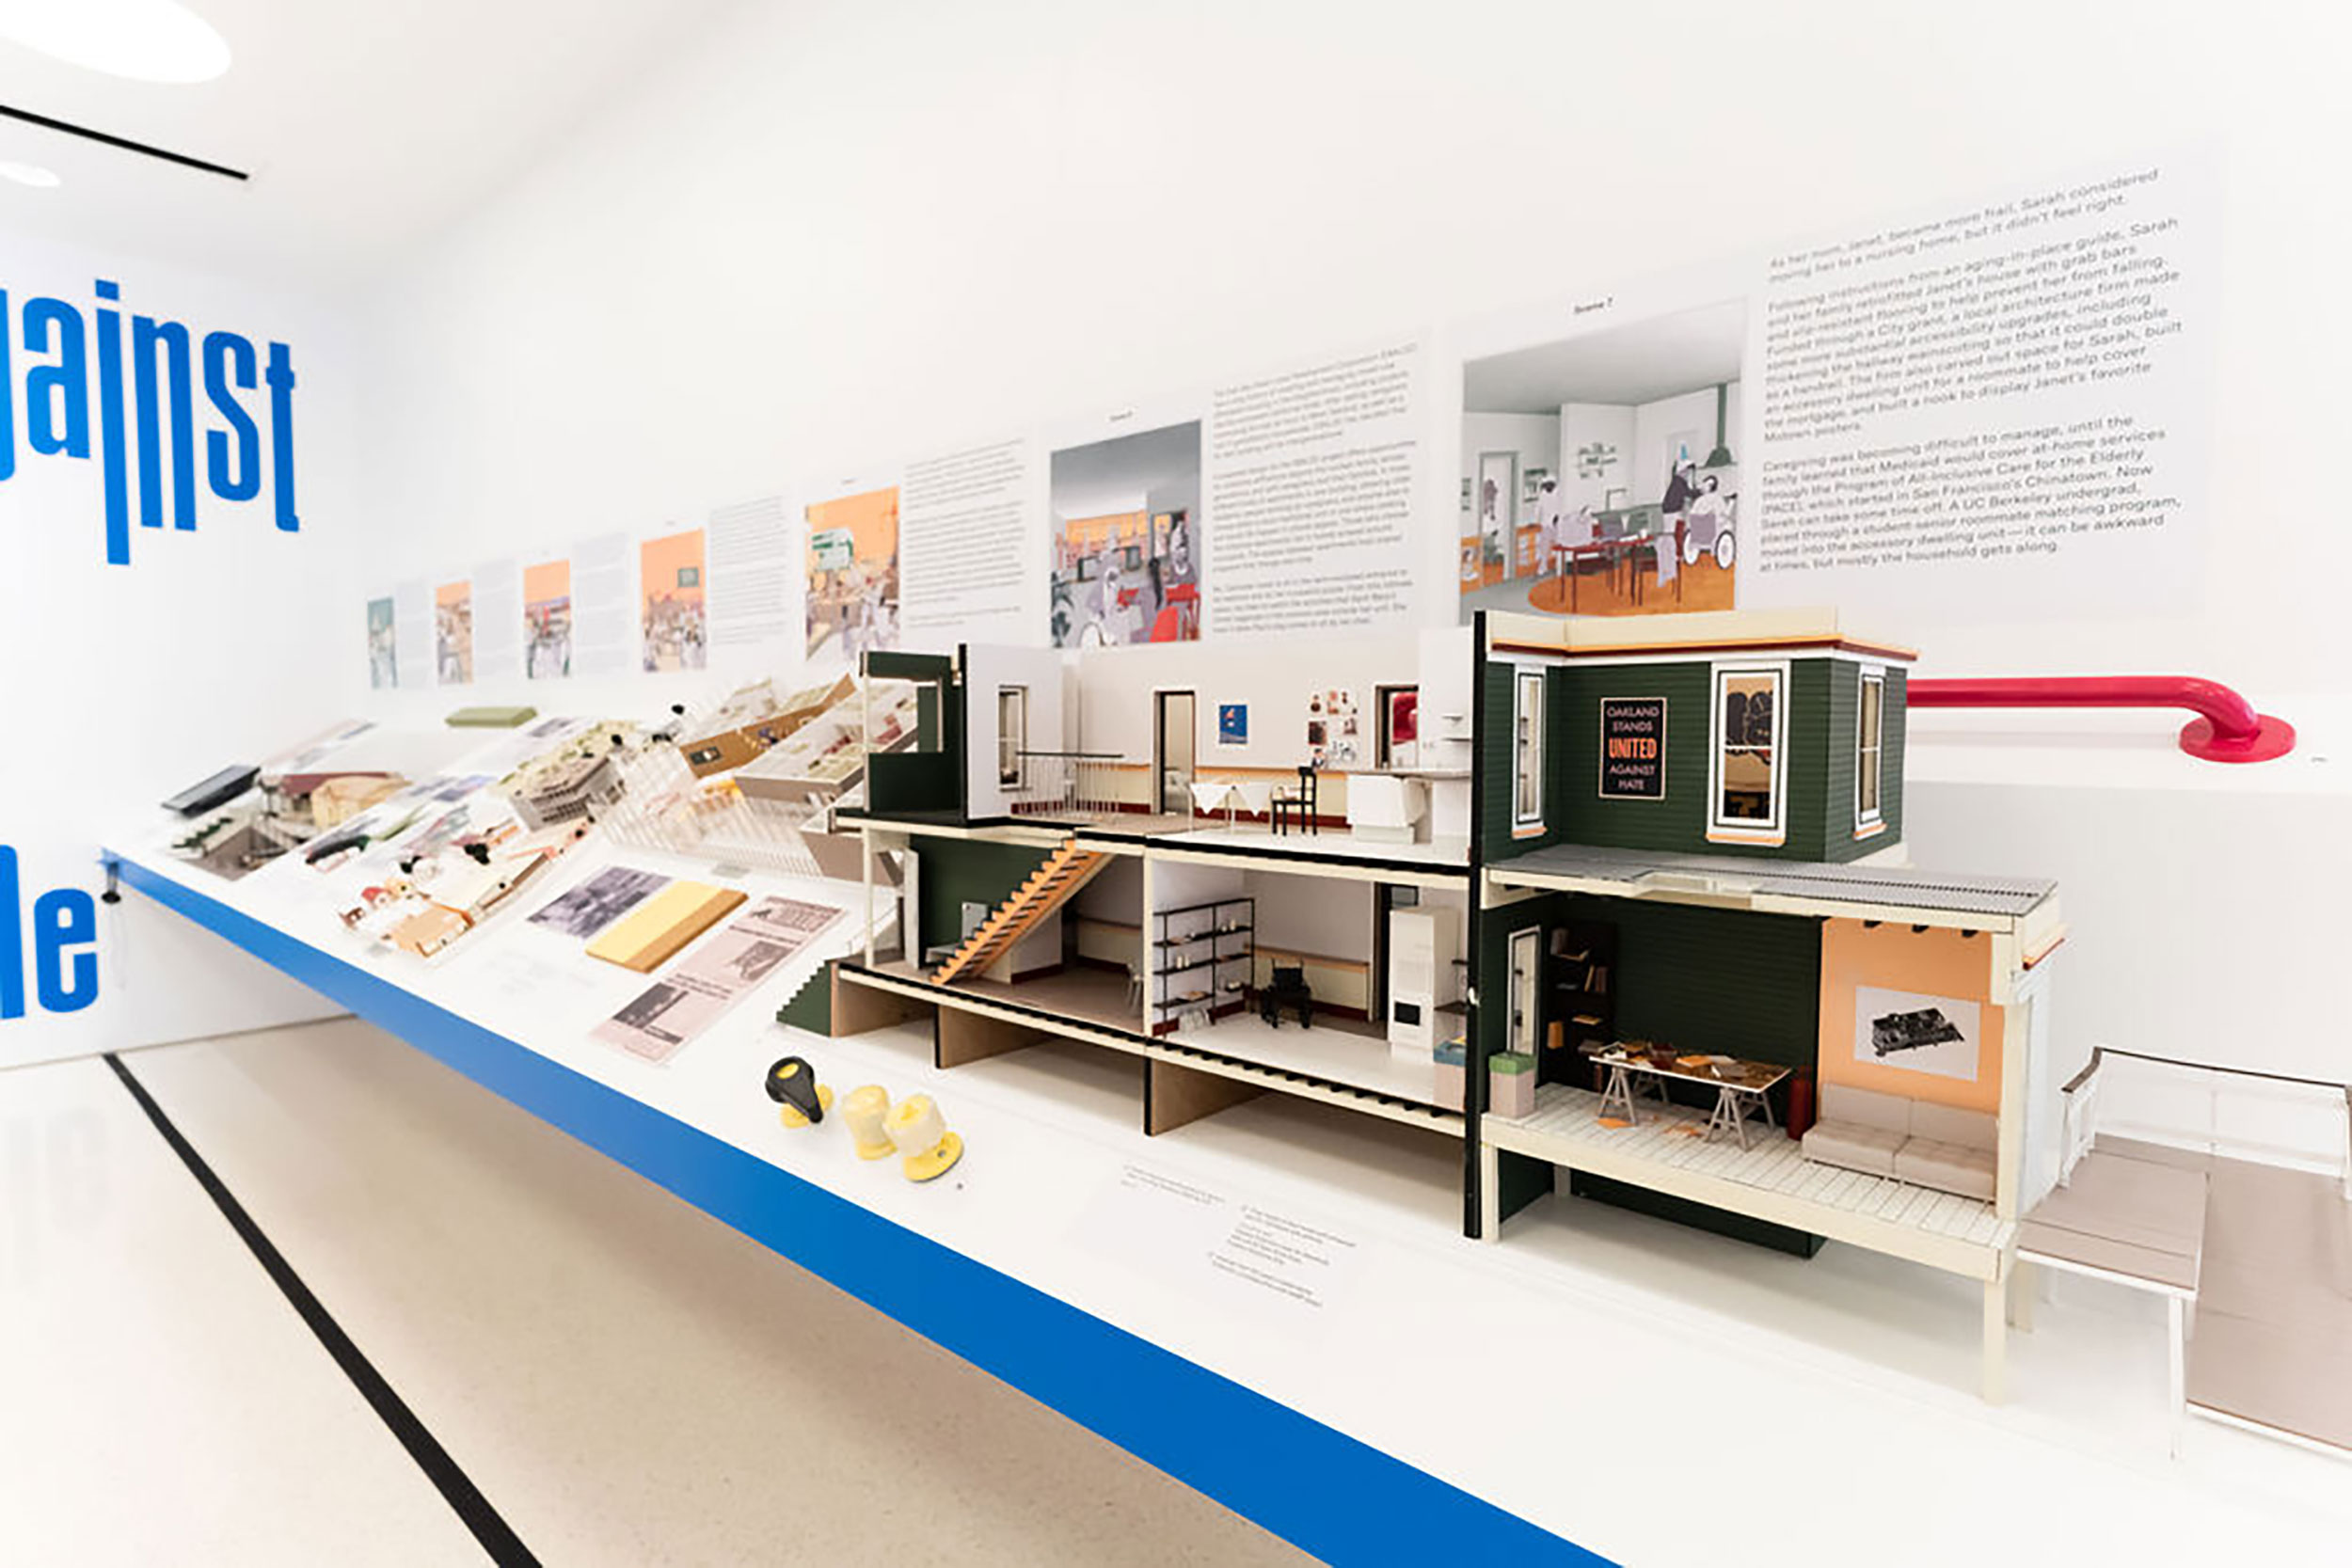 Installation view of a gallery wall with text and images, with a shelf that has 3D architectural models on it.